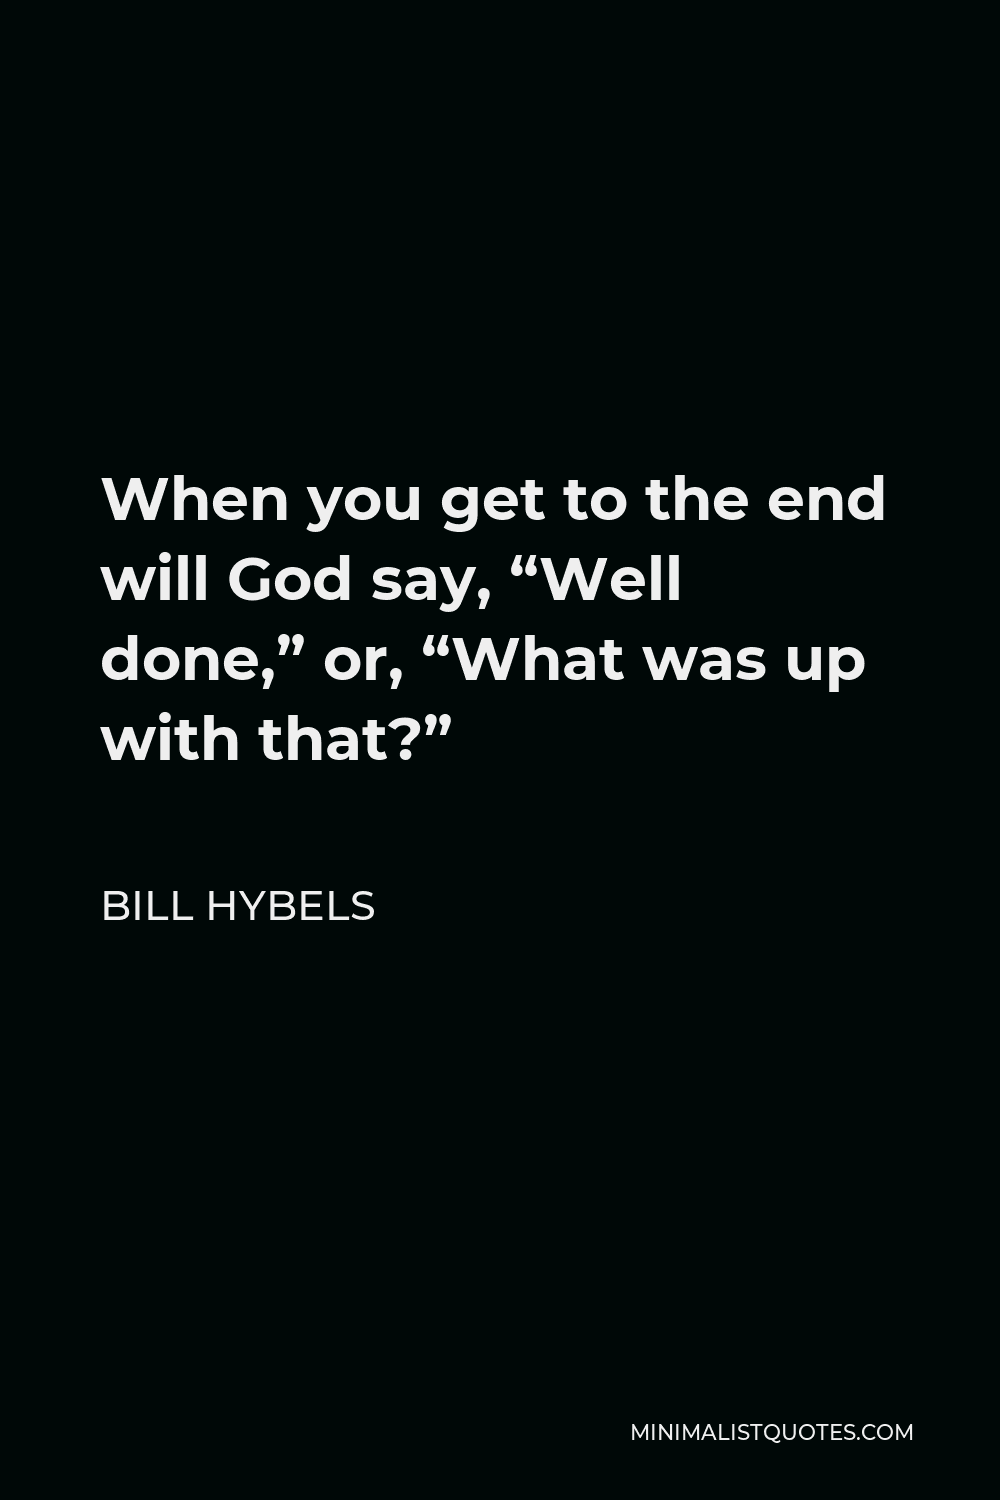 Bill Hybels Quote - When you get to the end will God say, “Well done,” or, “What was up with that?”